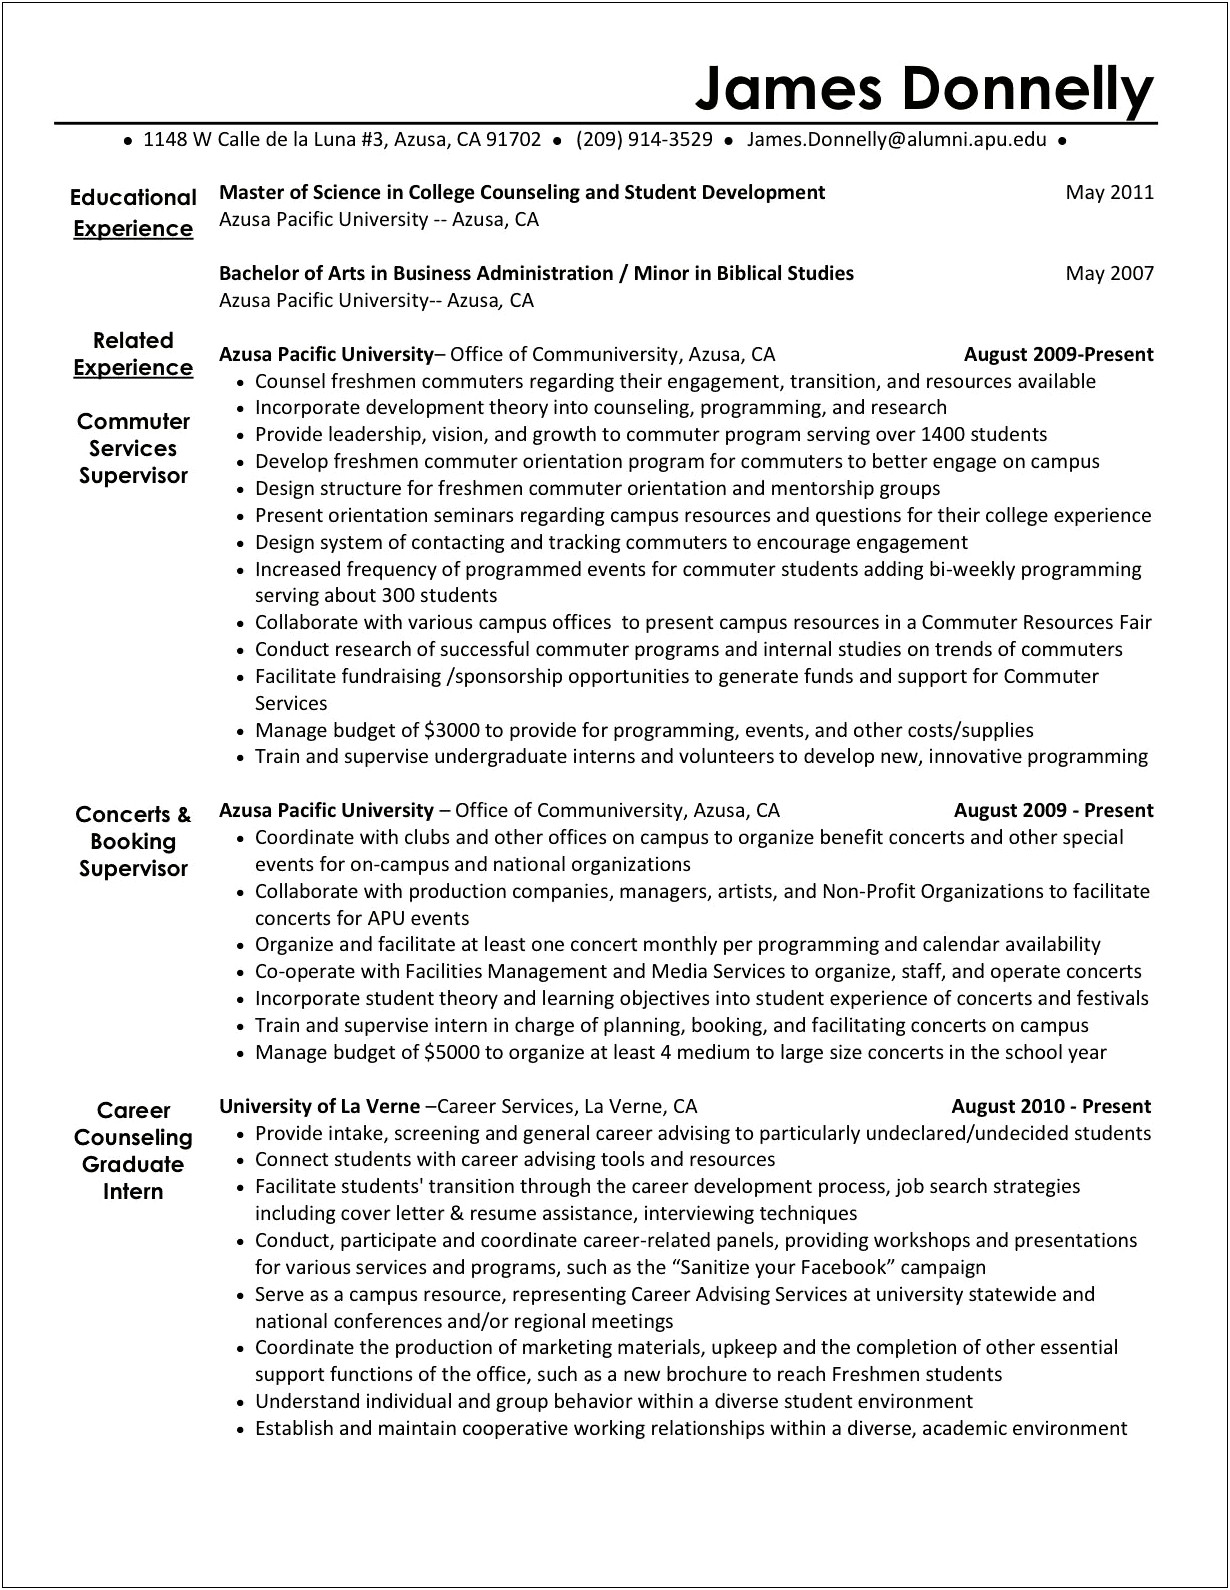 Where To Put Extracurriculars In Resume